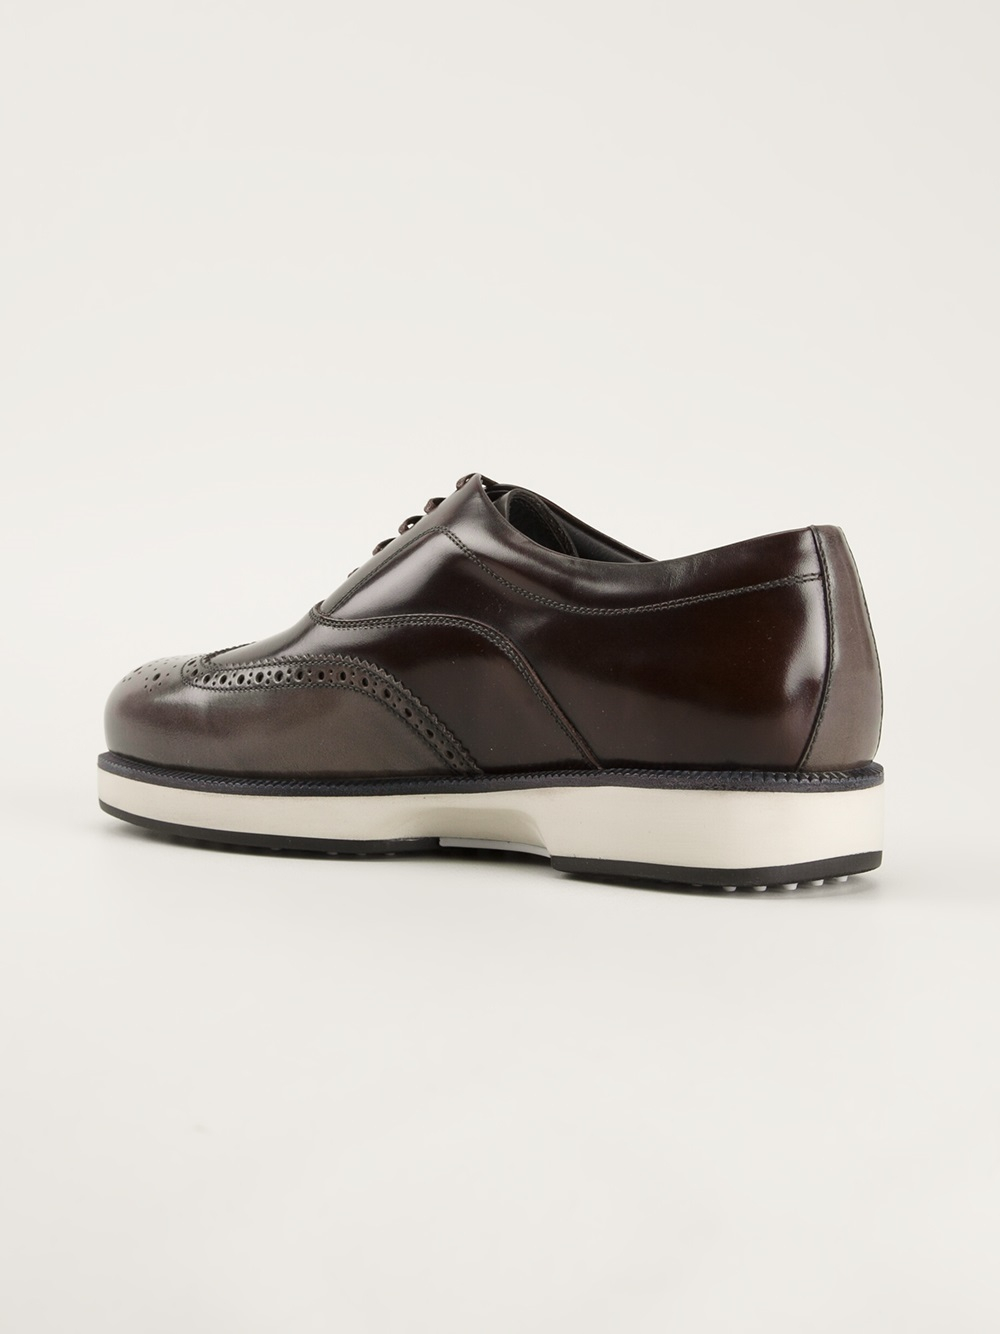 Ferragamo Chunky Sole Brogues in Brown for Men - Lyst